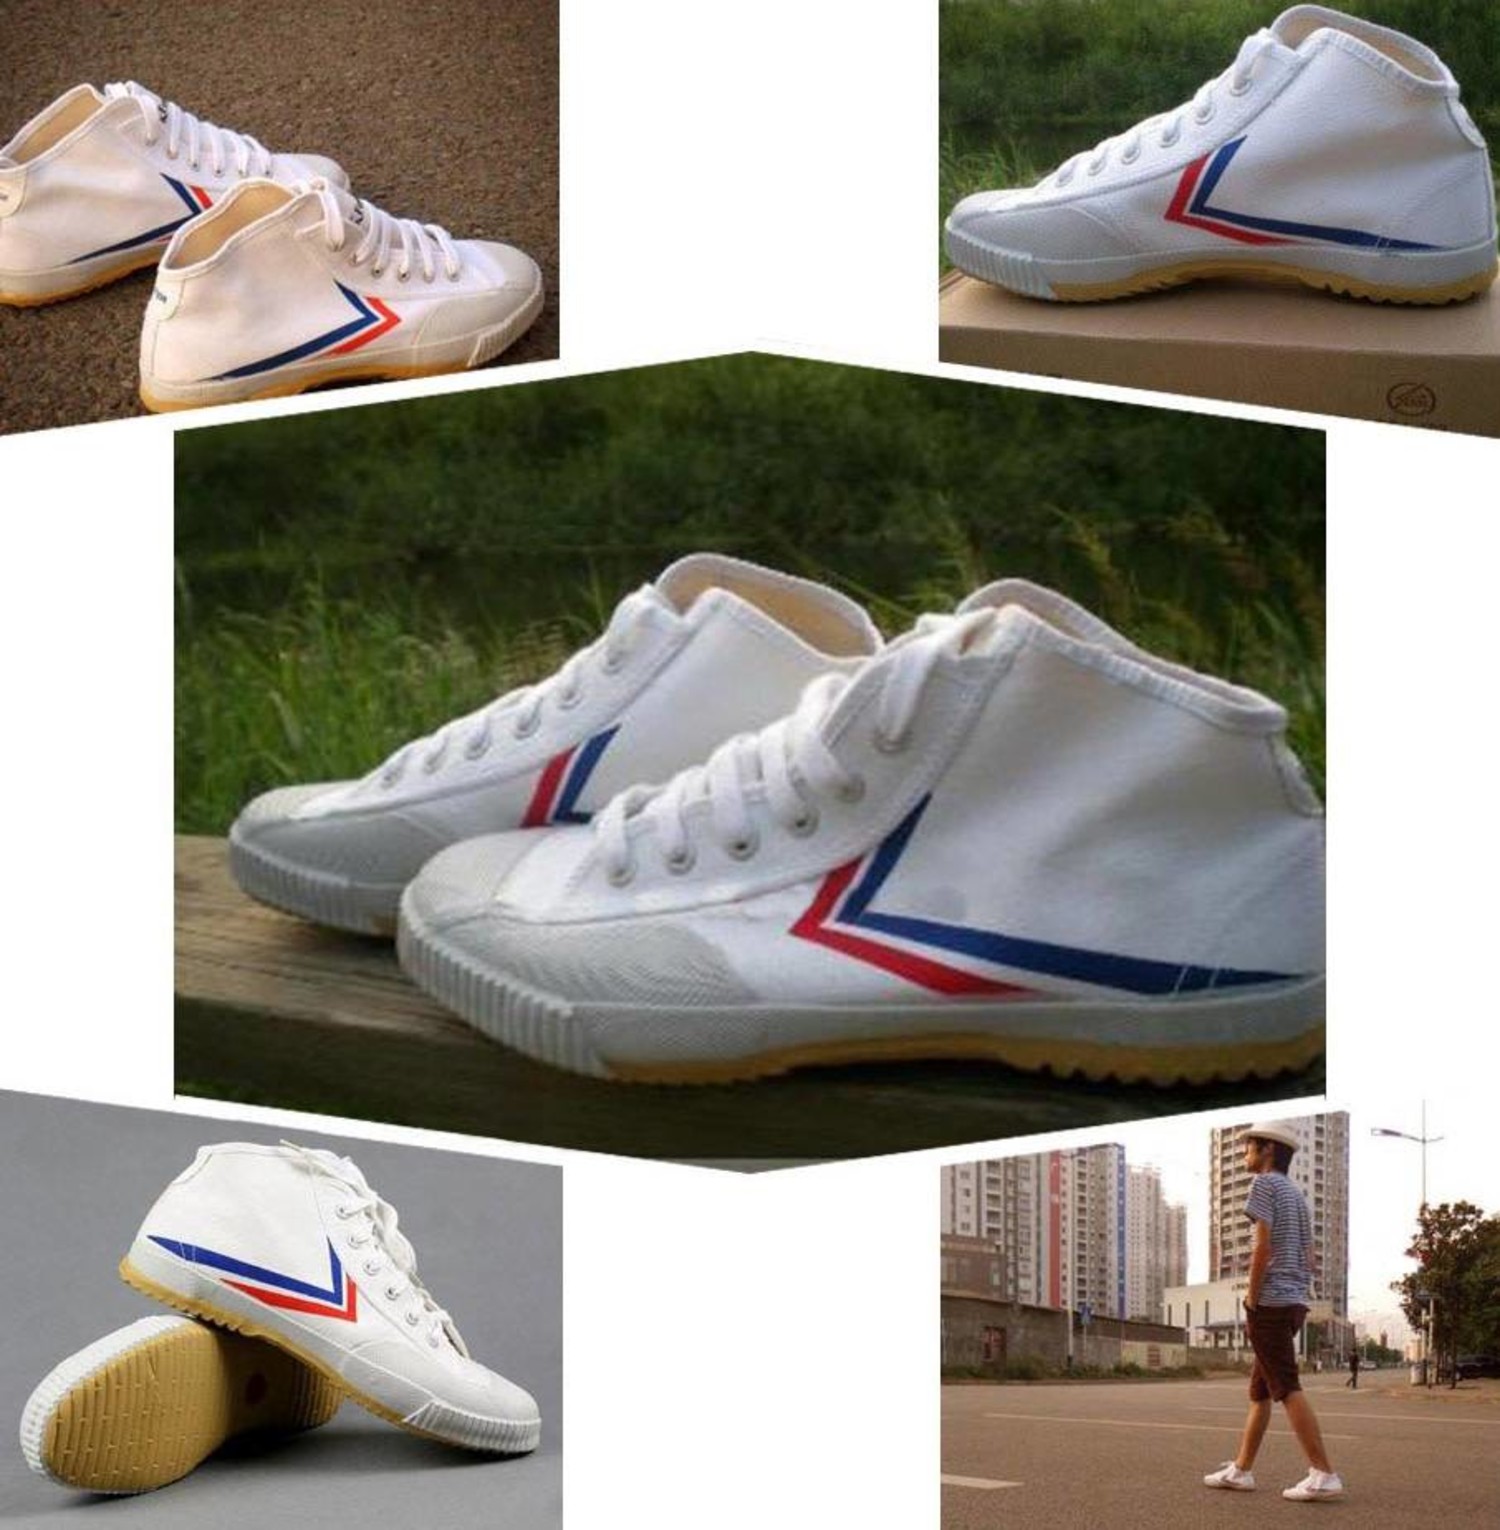 Kung Fu Shoes, Feiyue Kung Fu Shoes, White Parkour Shoes @